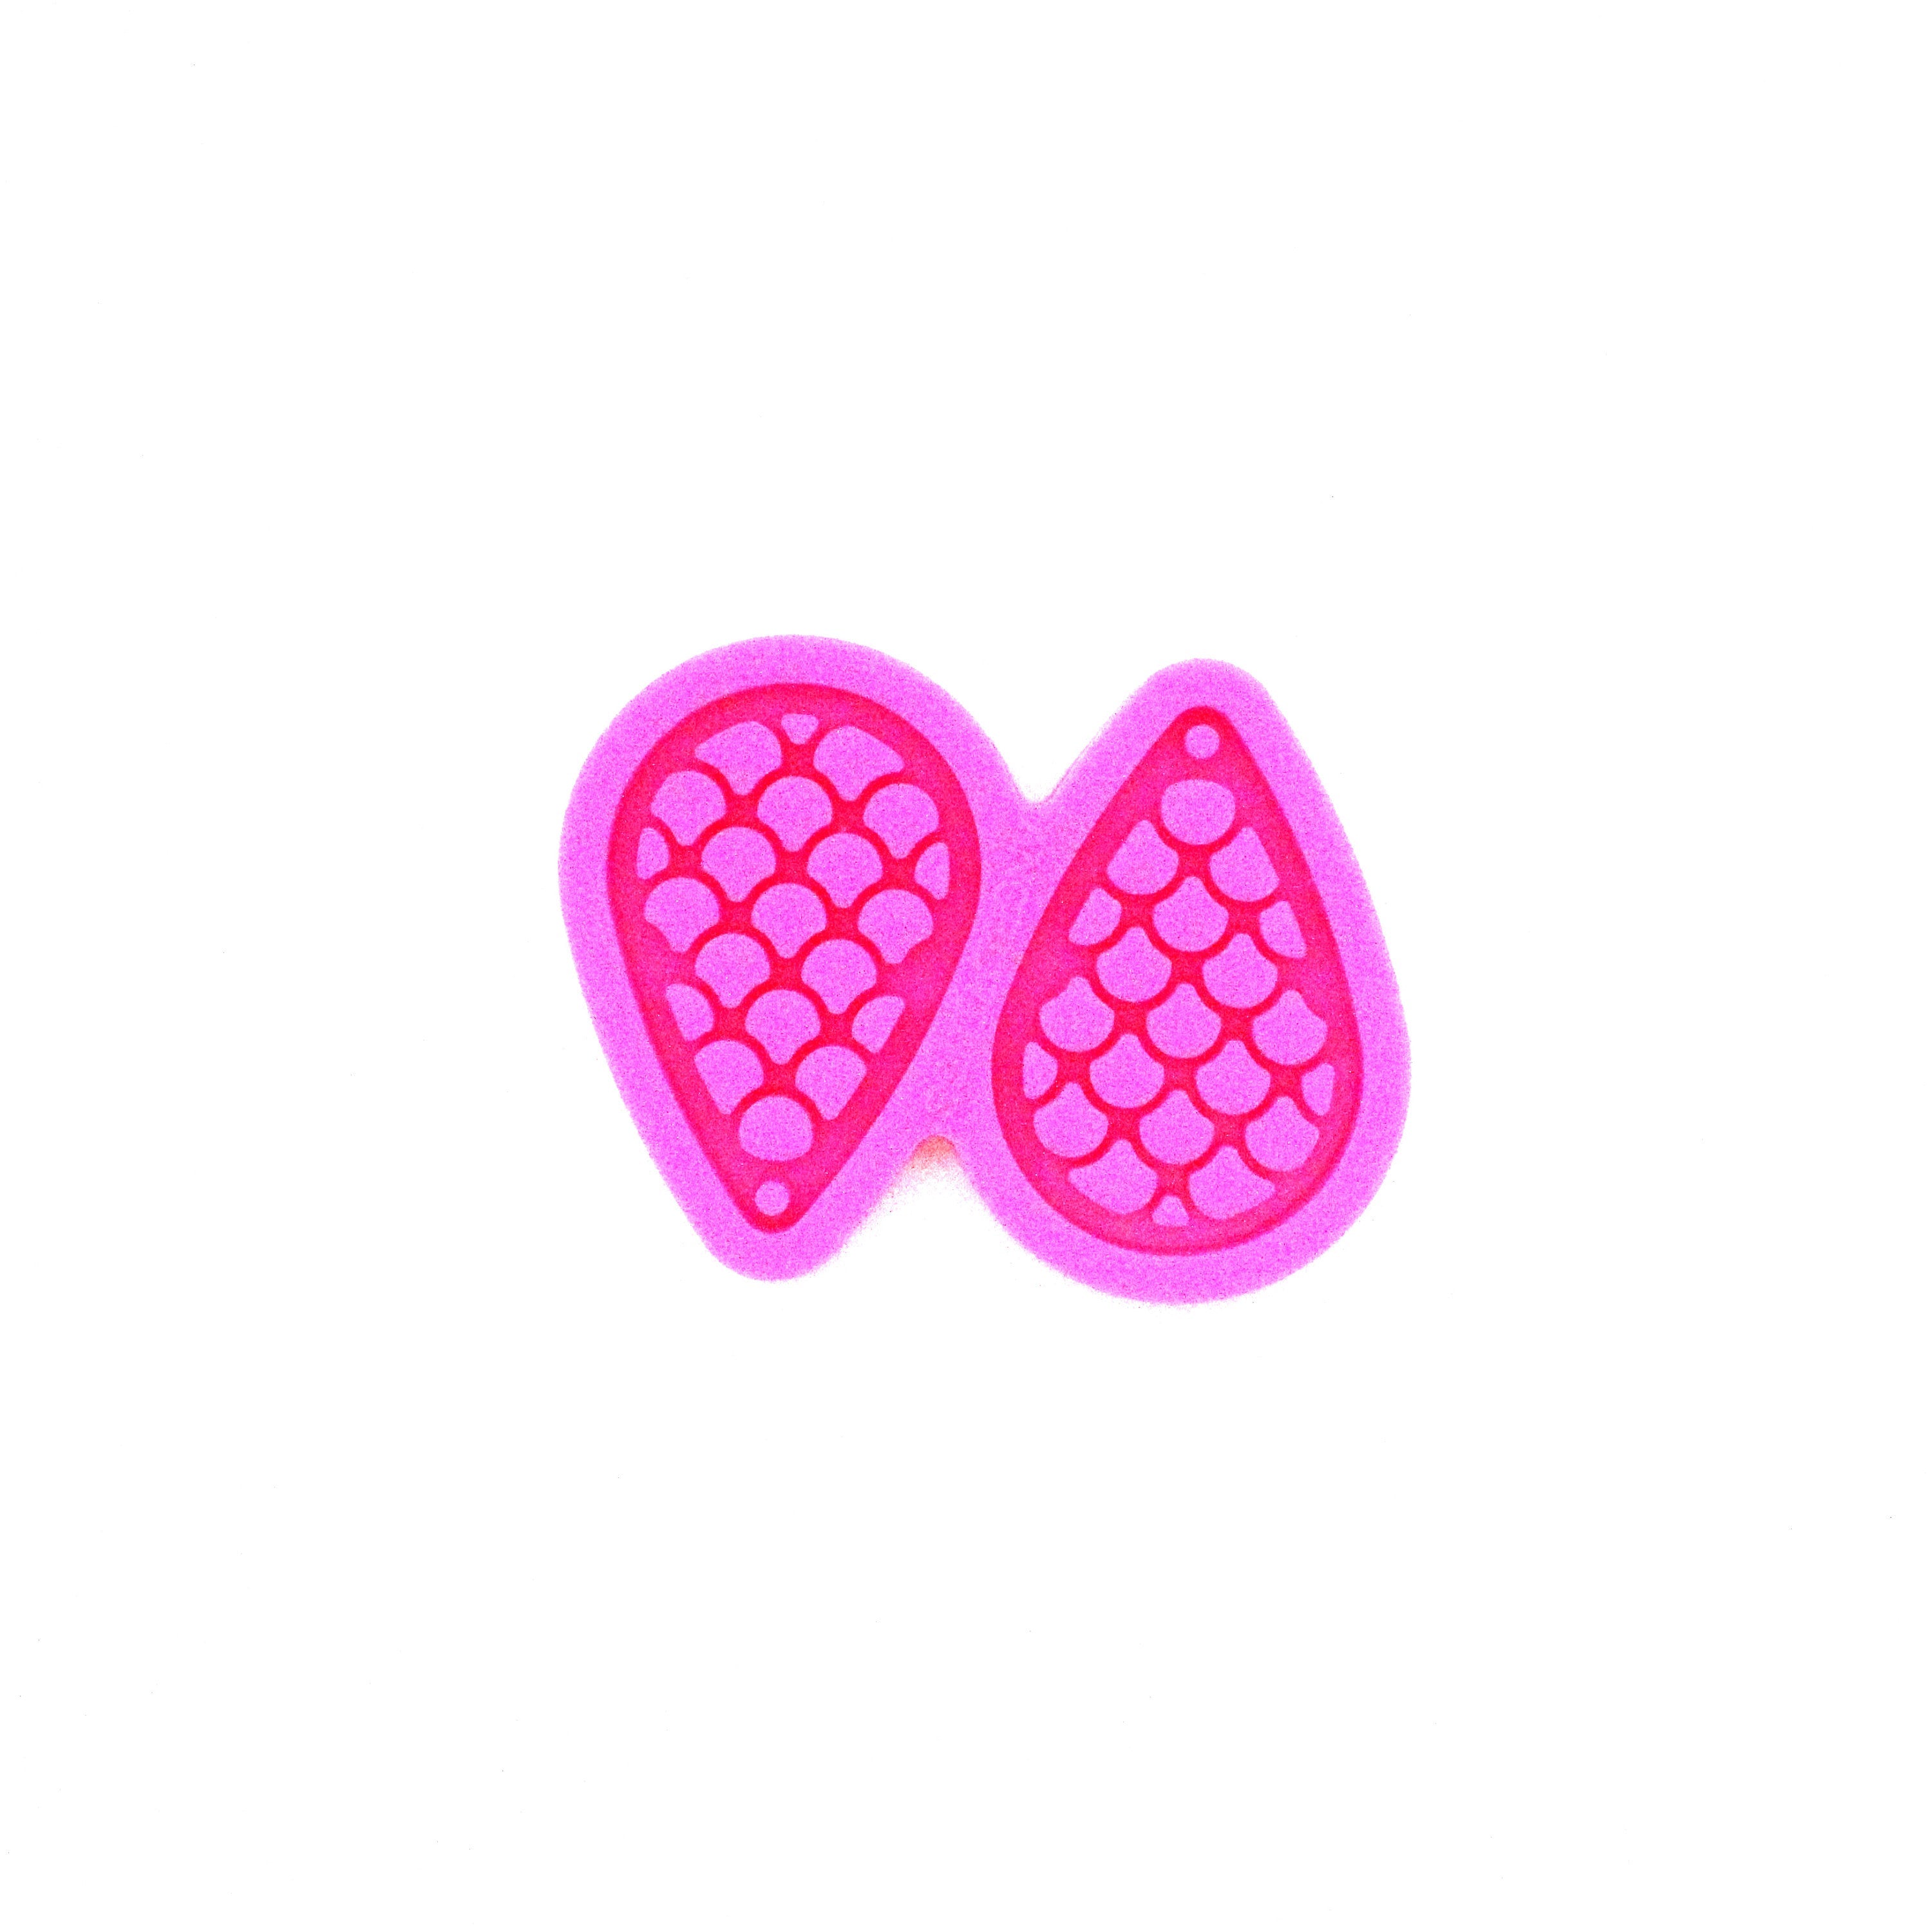 Mermaid Scale Teardrop Earring Shiny Silicone Mold for Epoxy Resin Jewelry Making Silicone Mold